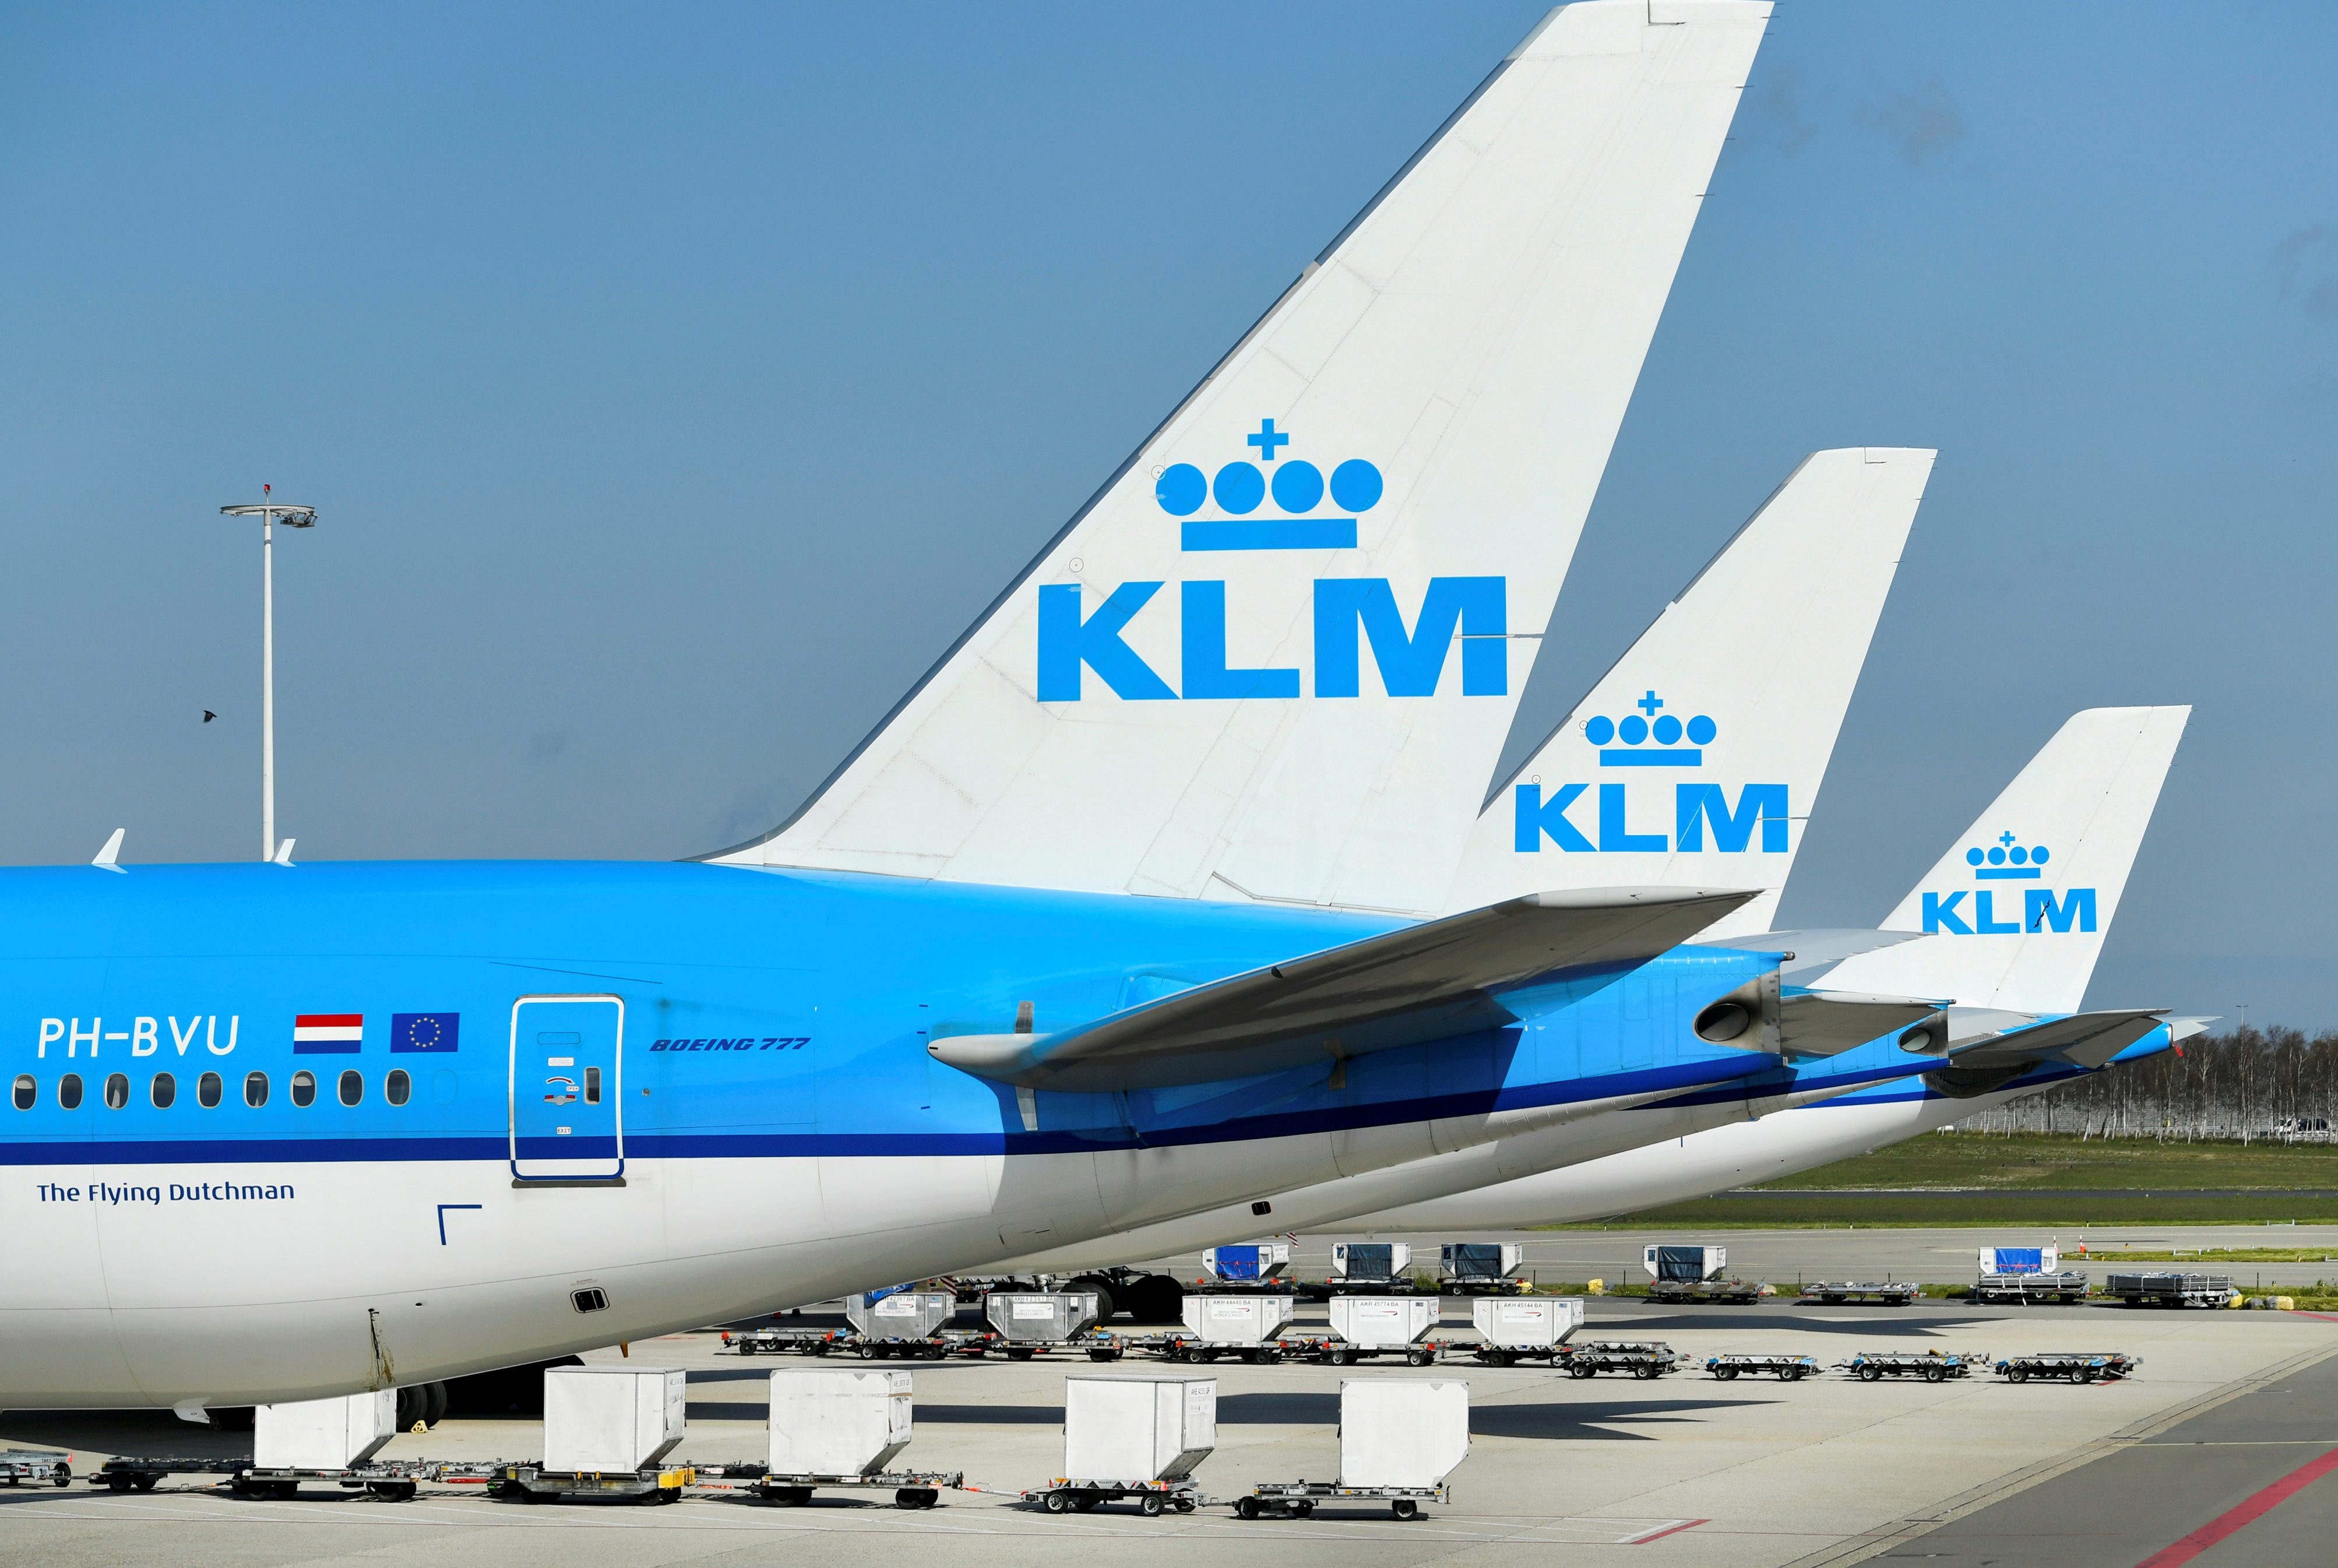 KLM to keep long-haul flights as COVID-19 testing demands softened